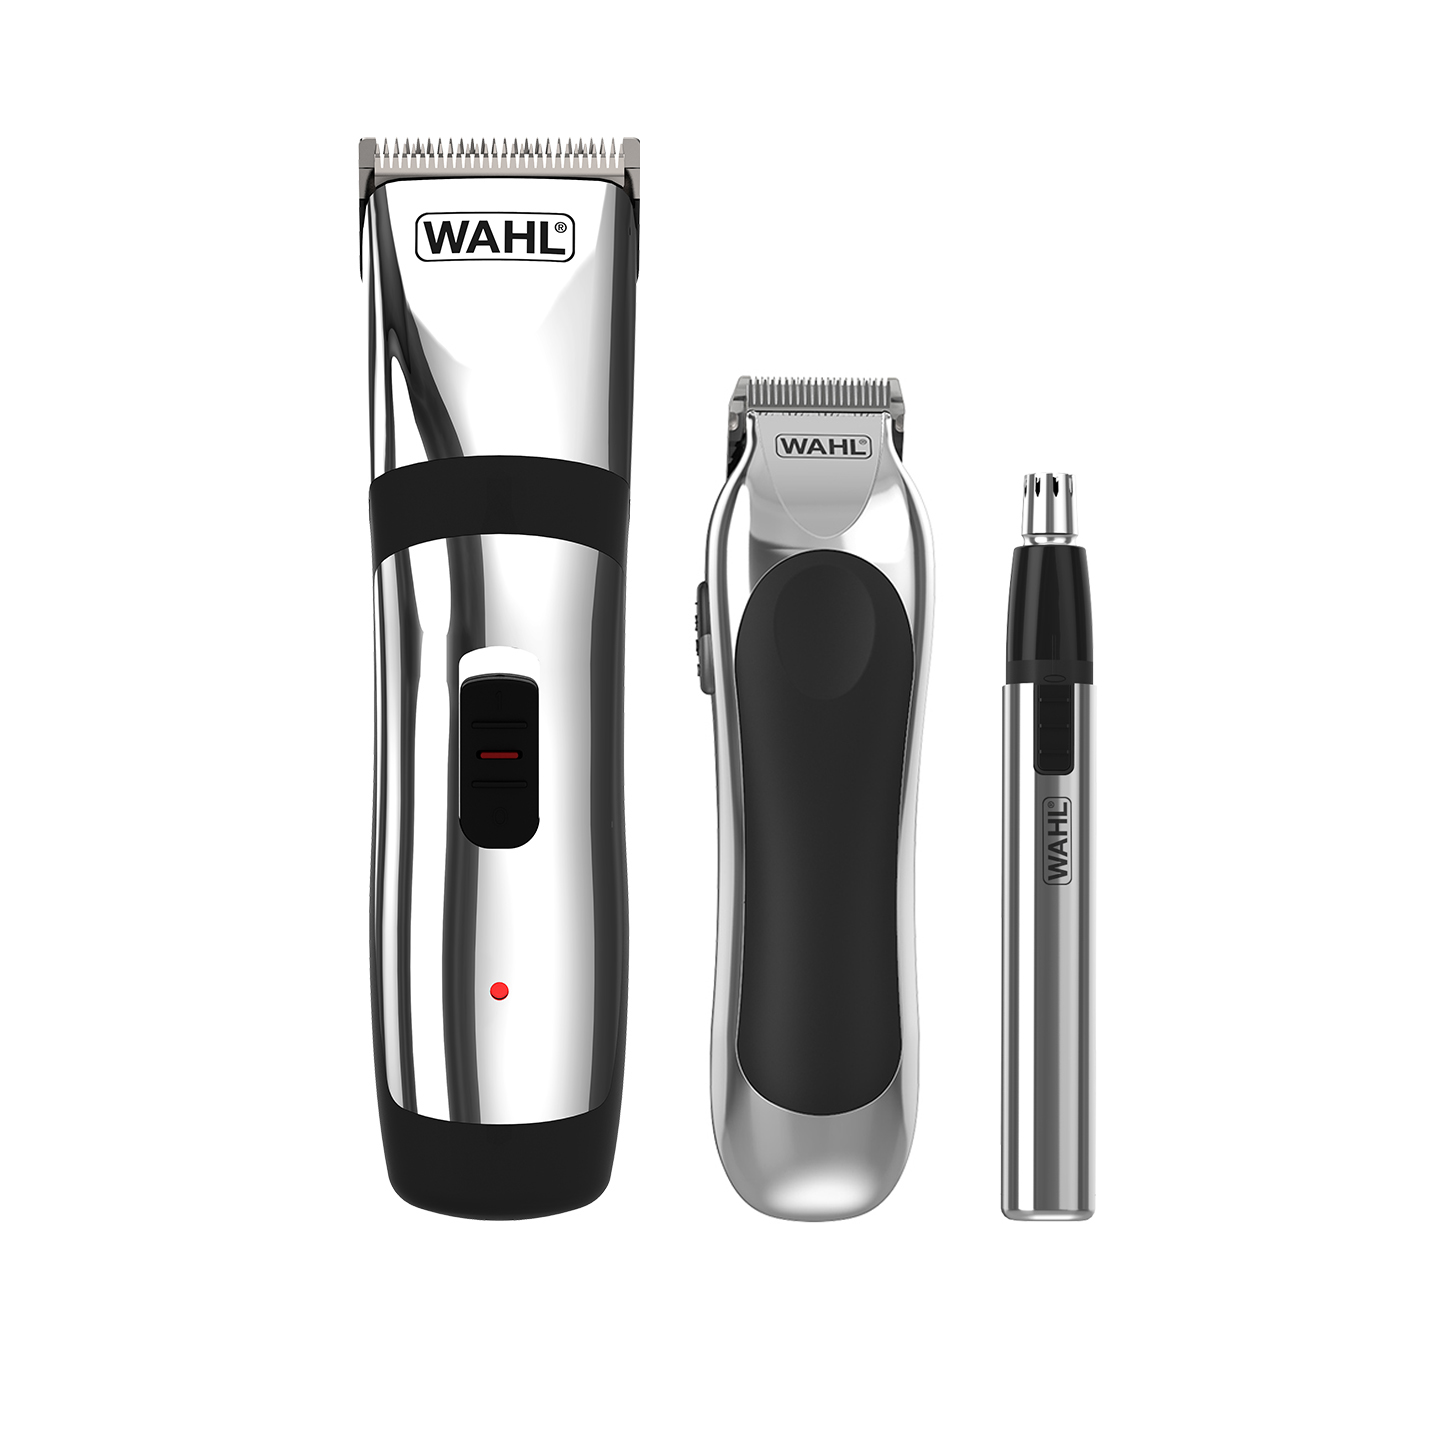 wahl cordless clippers set